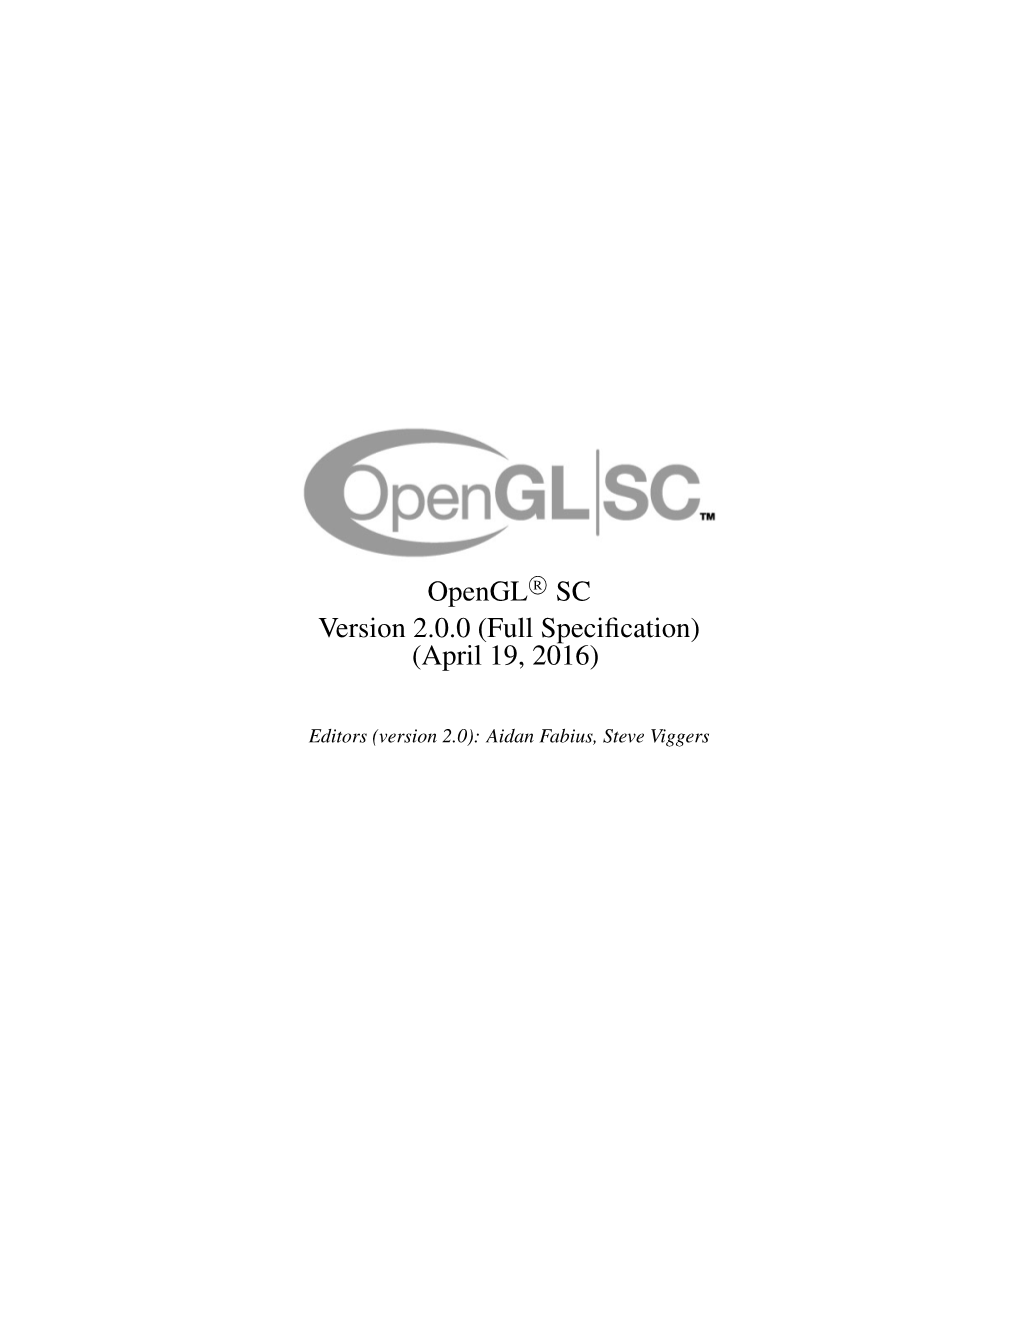 Opengl SC Logos Are Trademarks of Silicon Graphics International Used Under License by Khronos